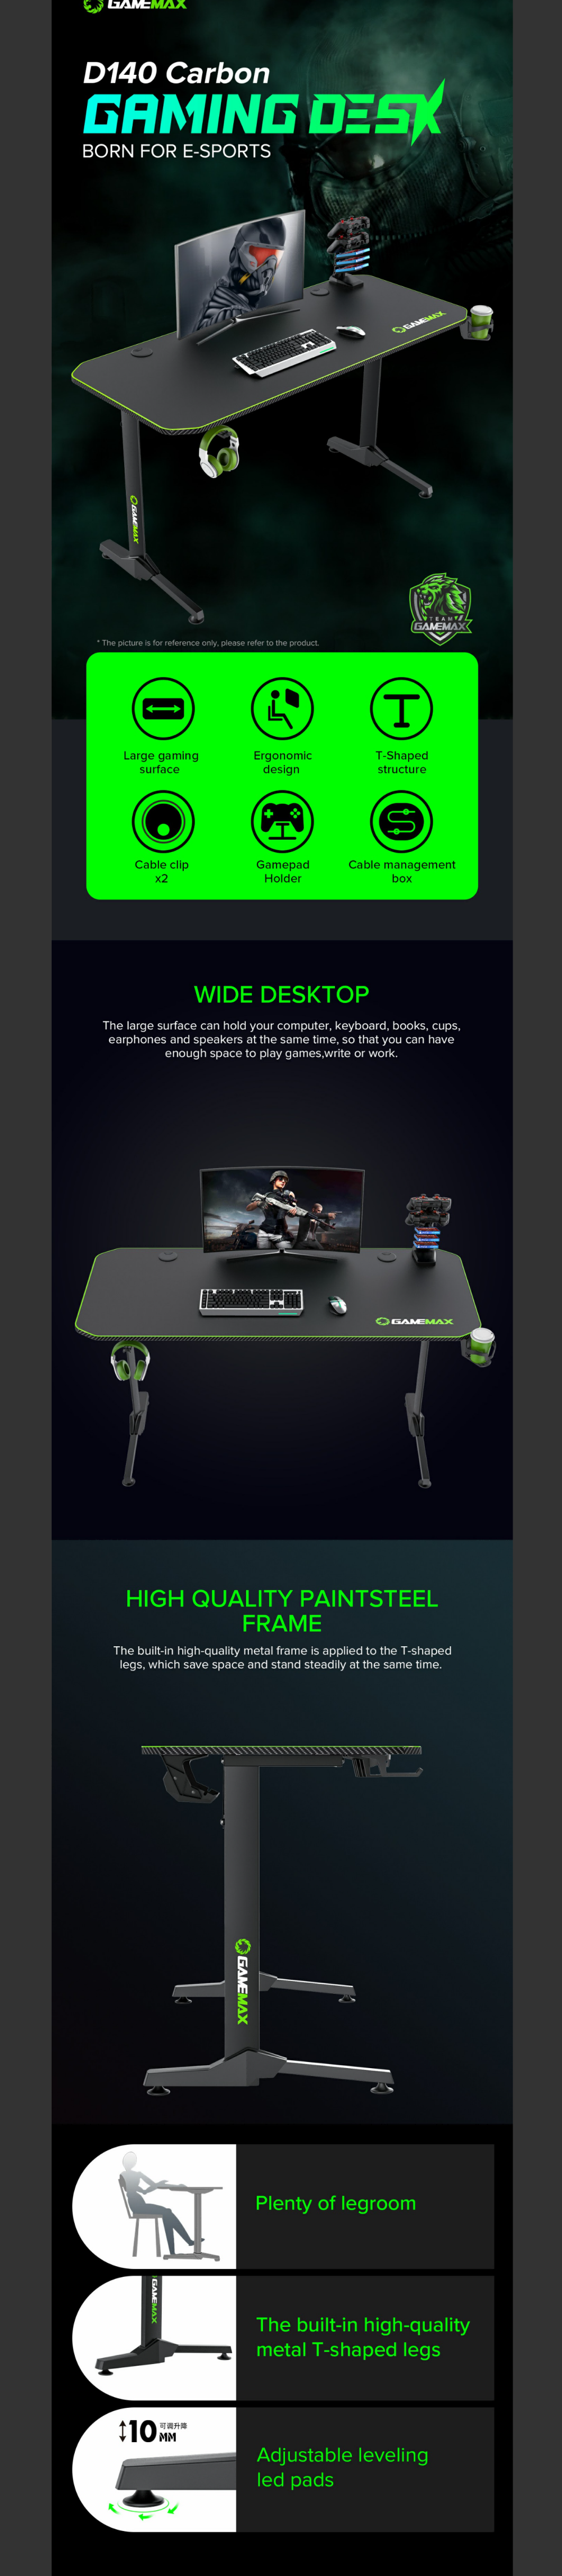 Gaming-Desks-GameMax-D140-Carbon-GAMING-DESK-Gaming-Desk-Without-RGB-Extension-Stand-16